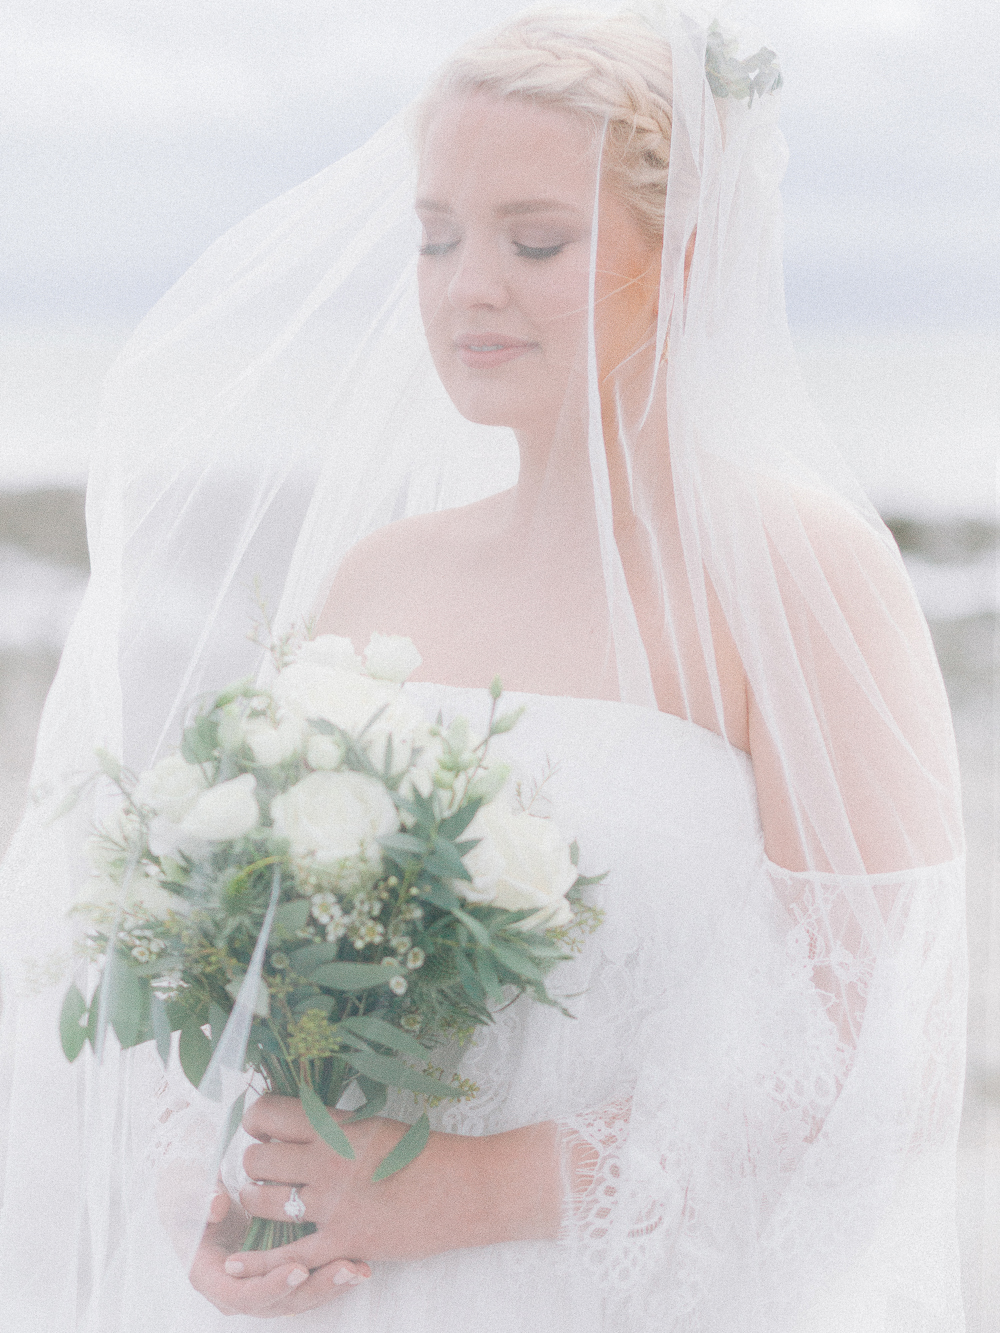 Stunning bridal portrait at Rosedew Farm of bride covered in veil